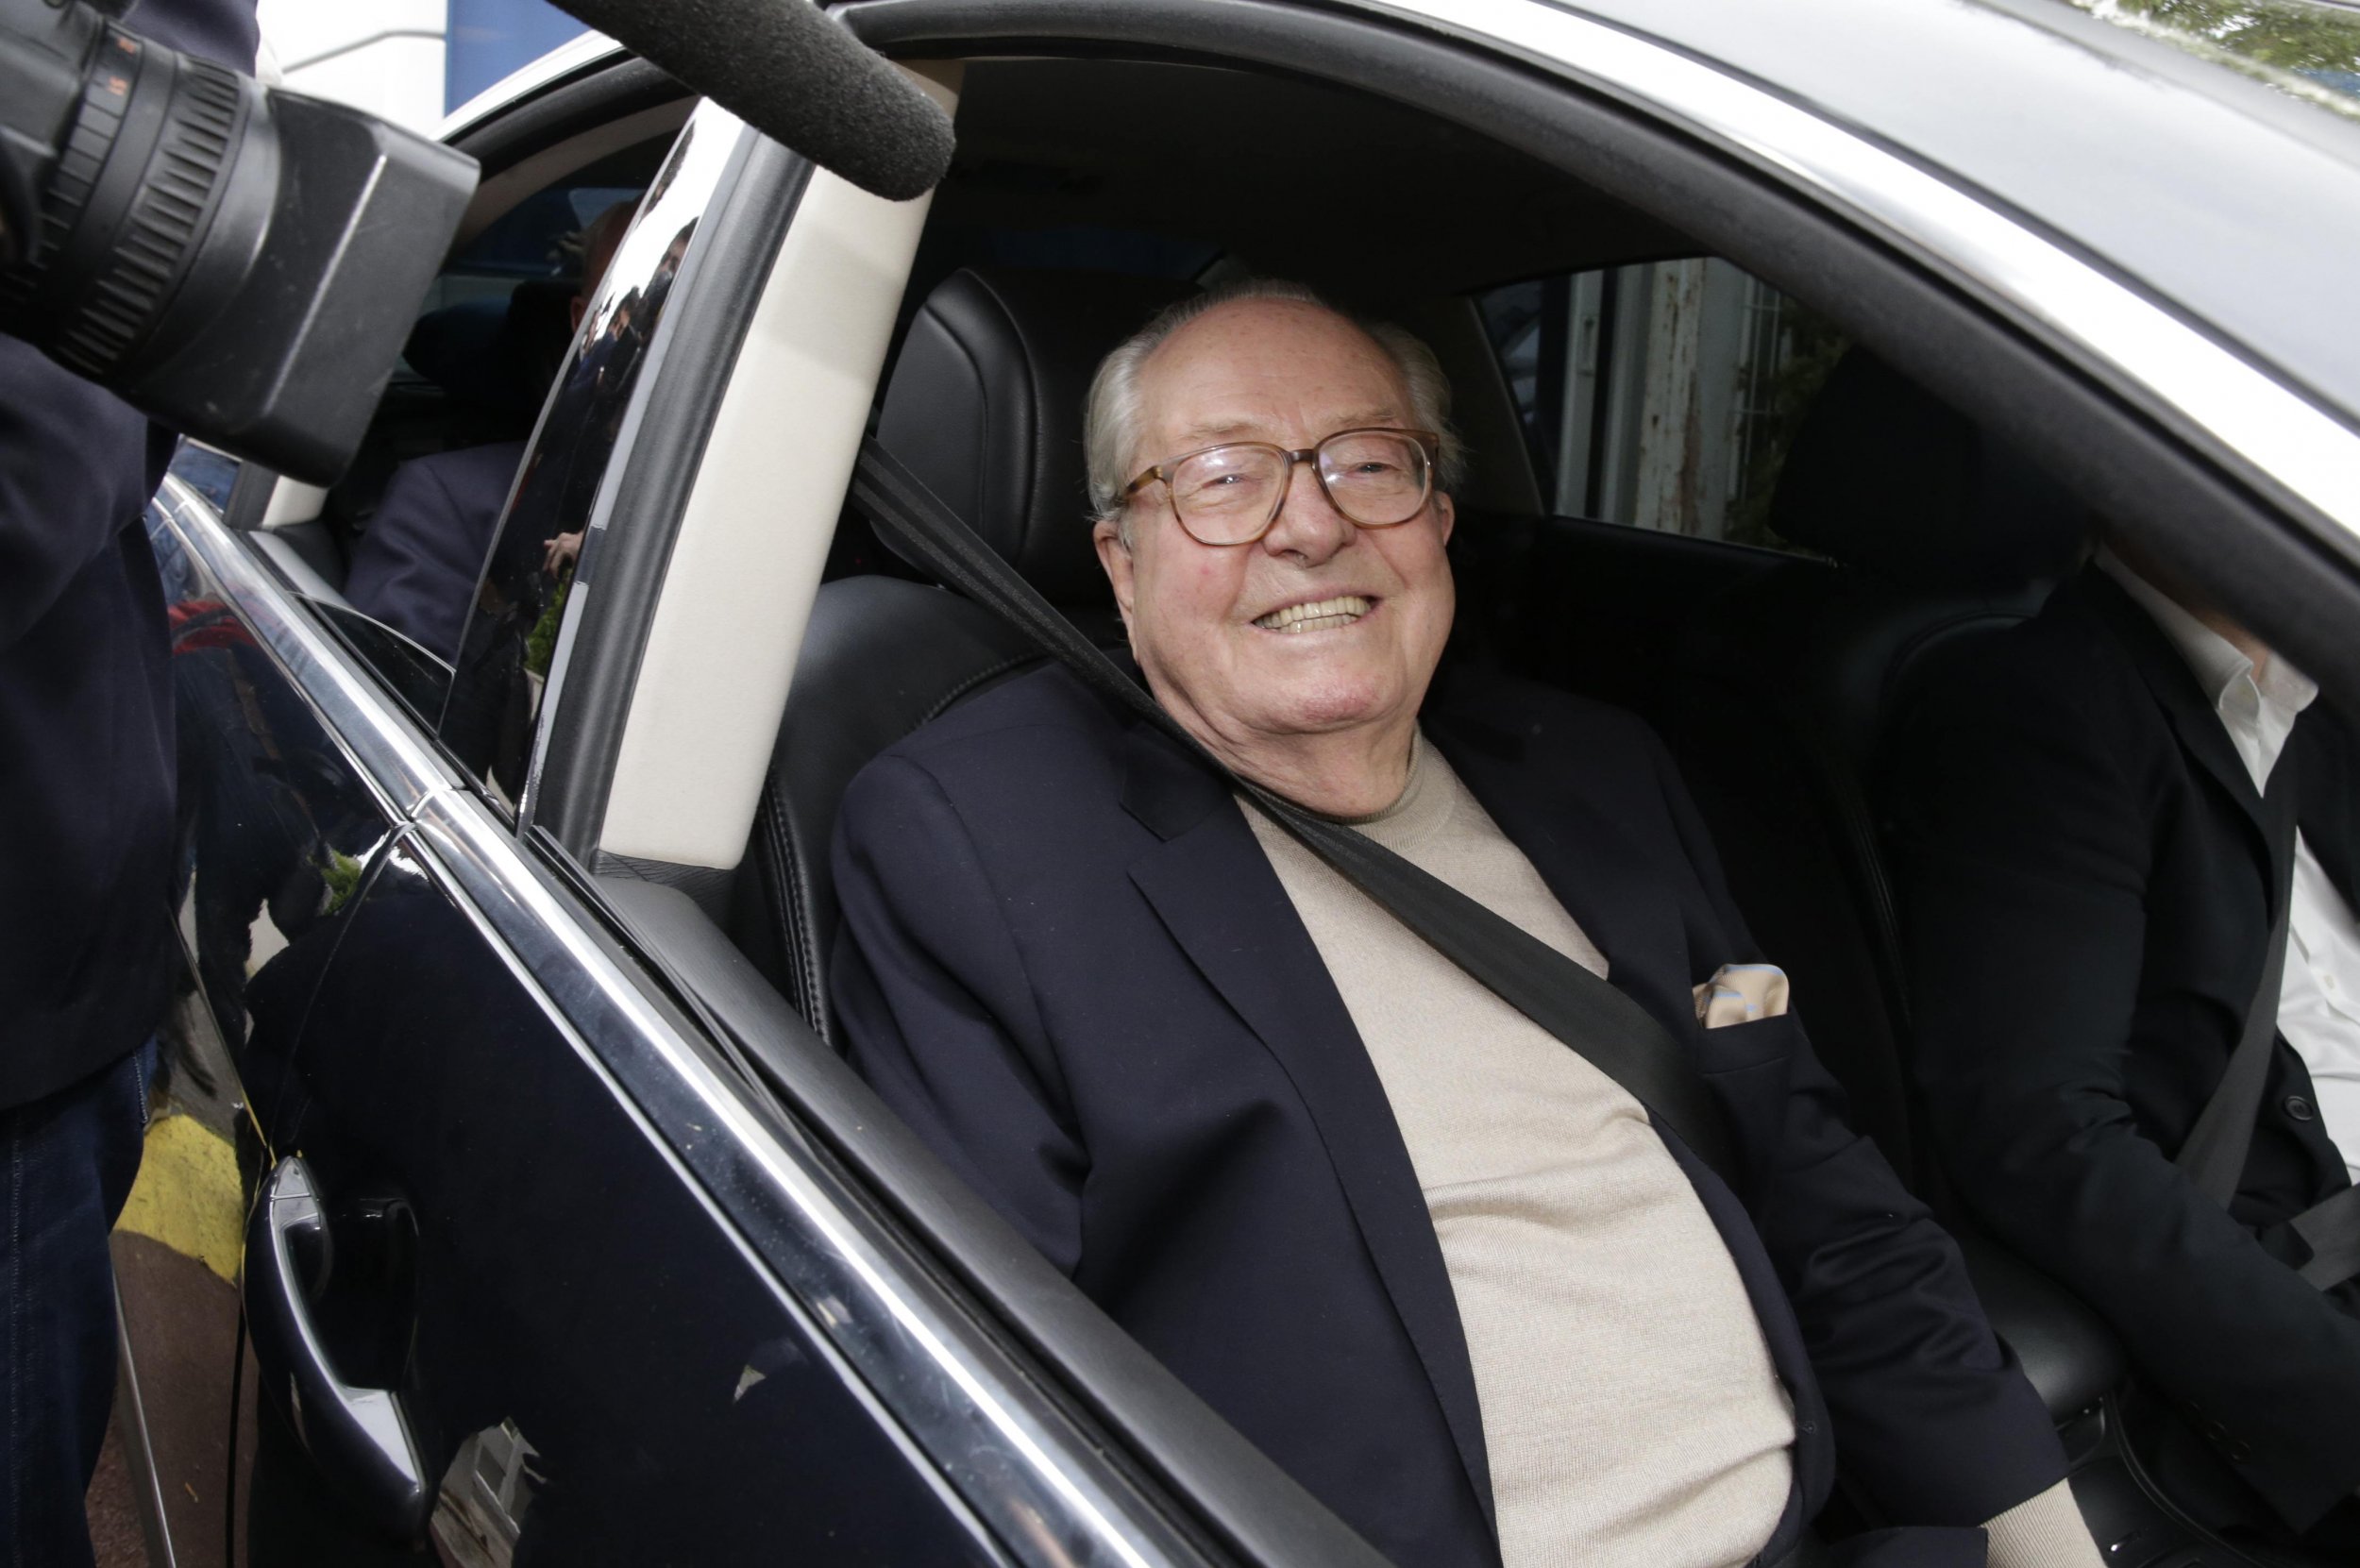 Jean-Marie Le Pen Suspended from National Front